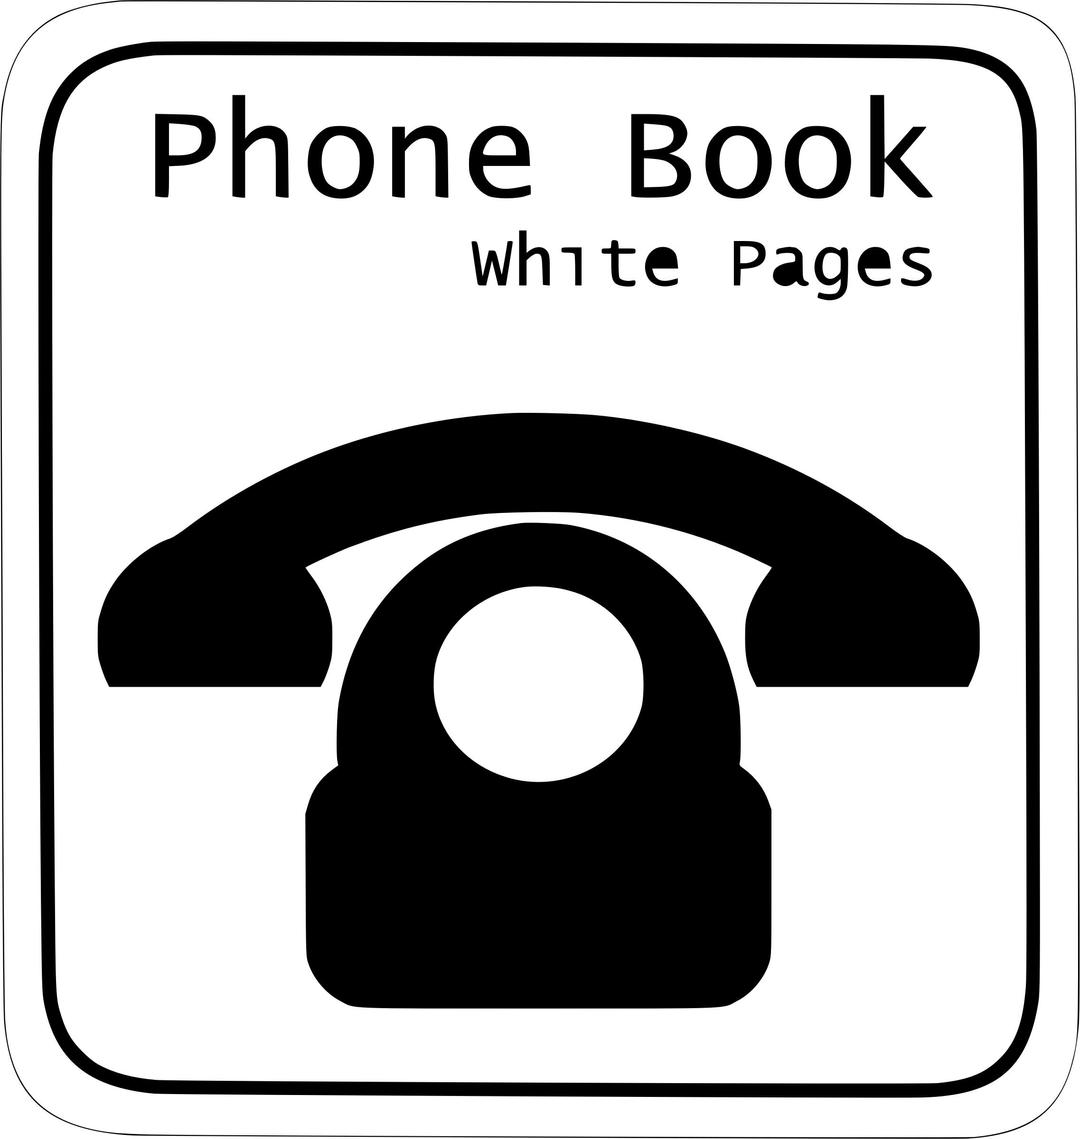 white pages phone book png transparent